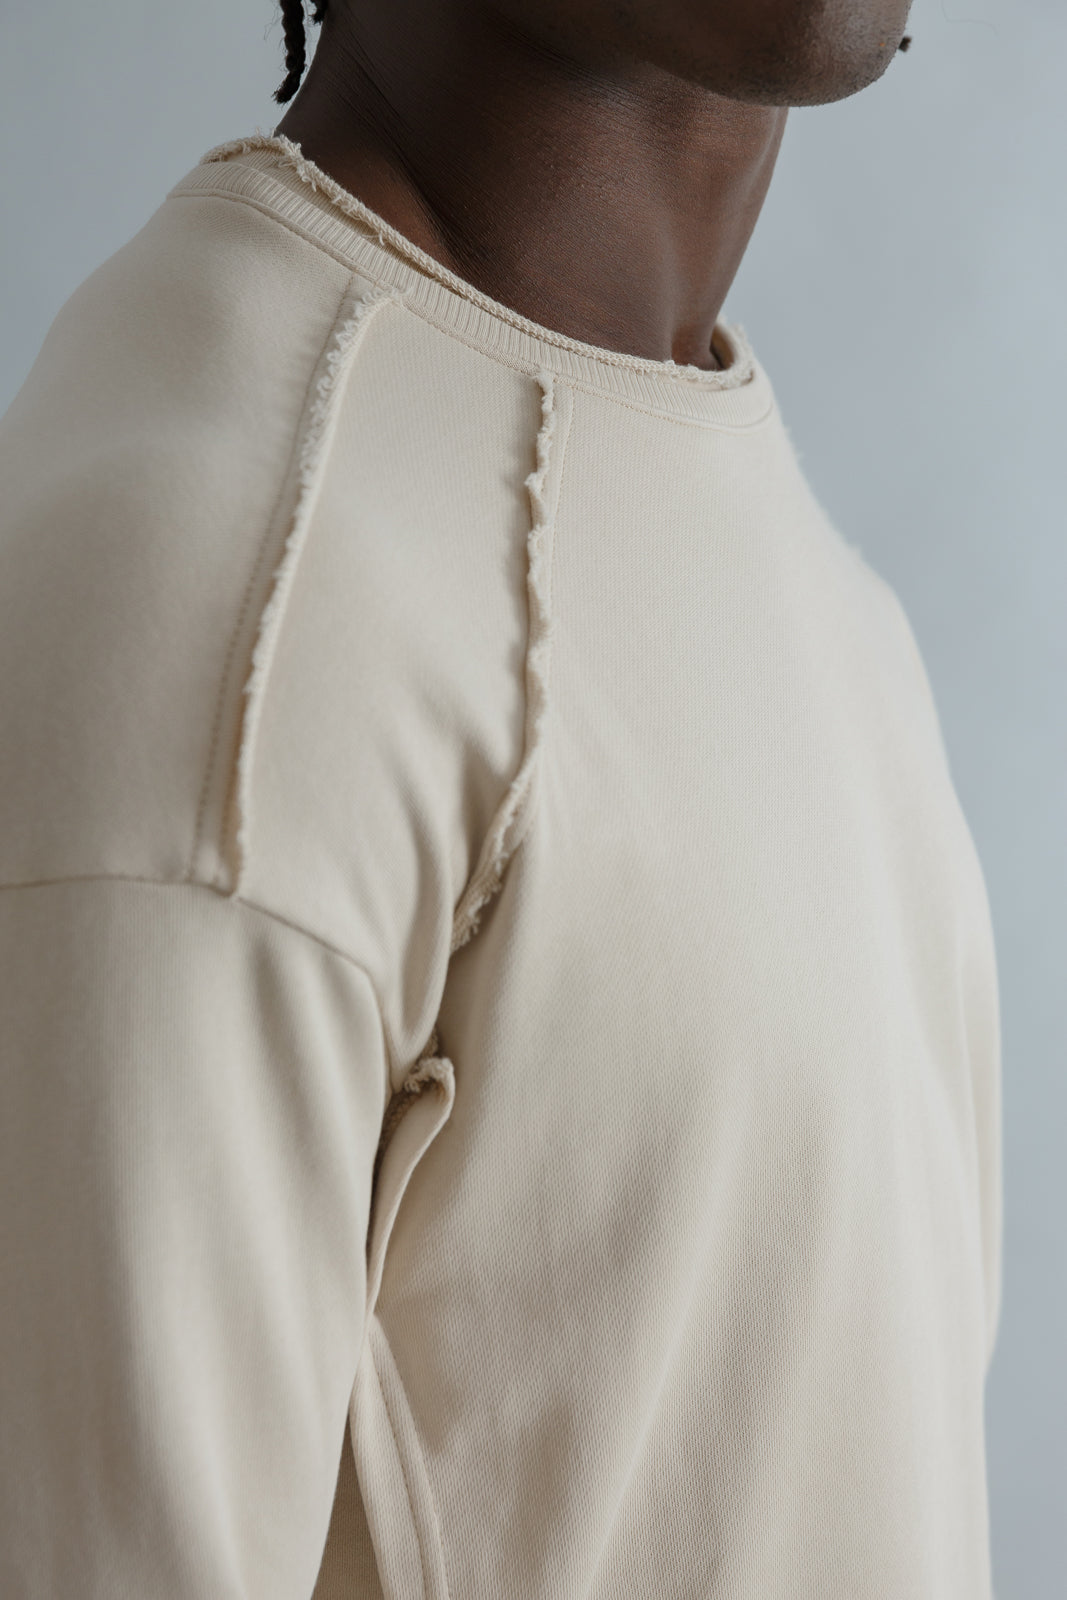 Sweatshirt with outer threads